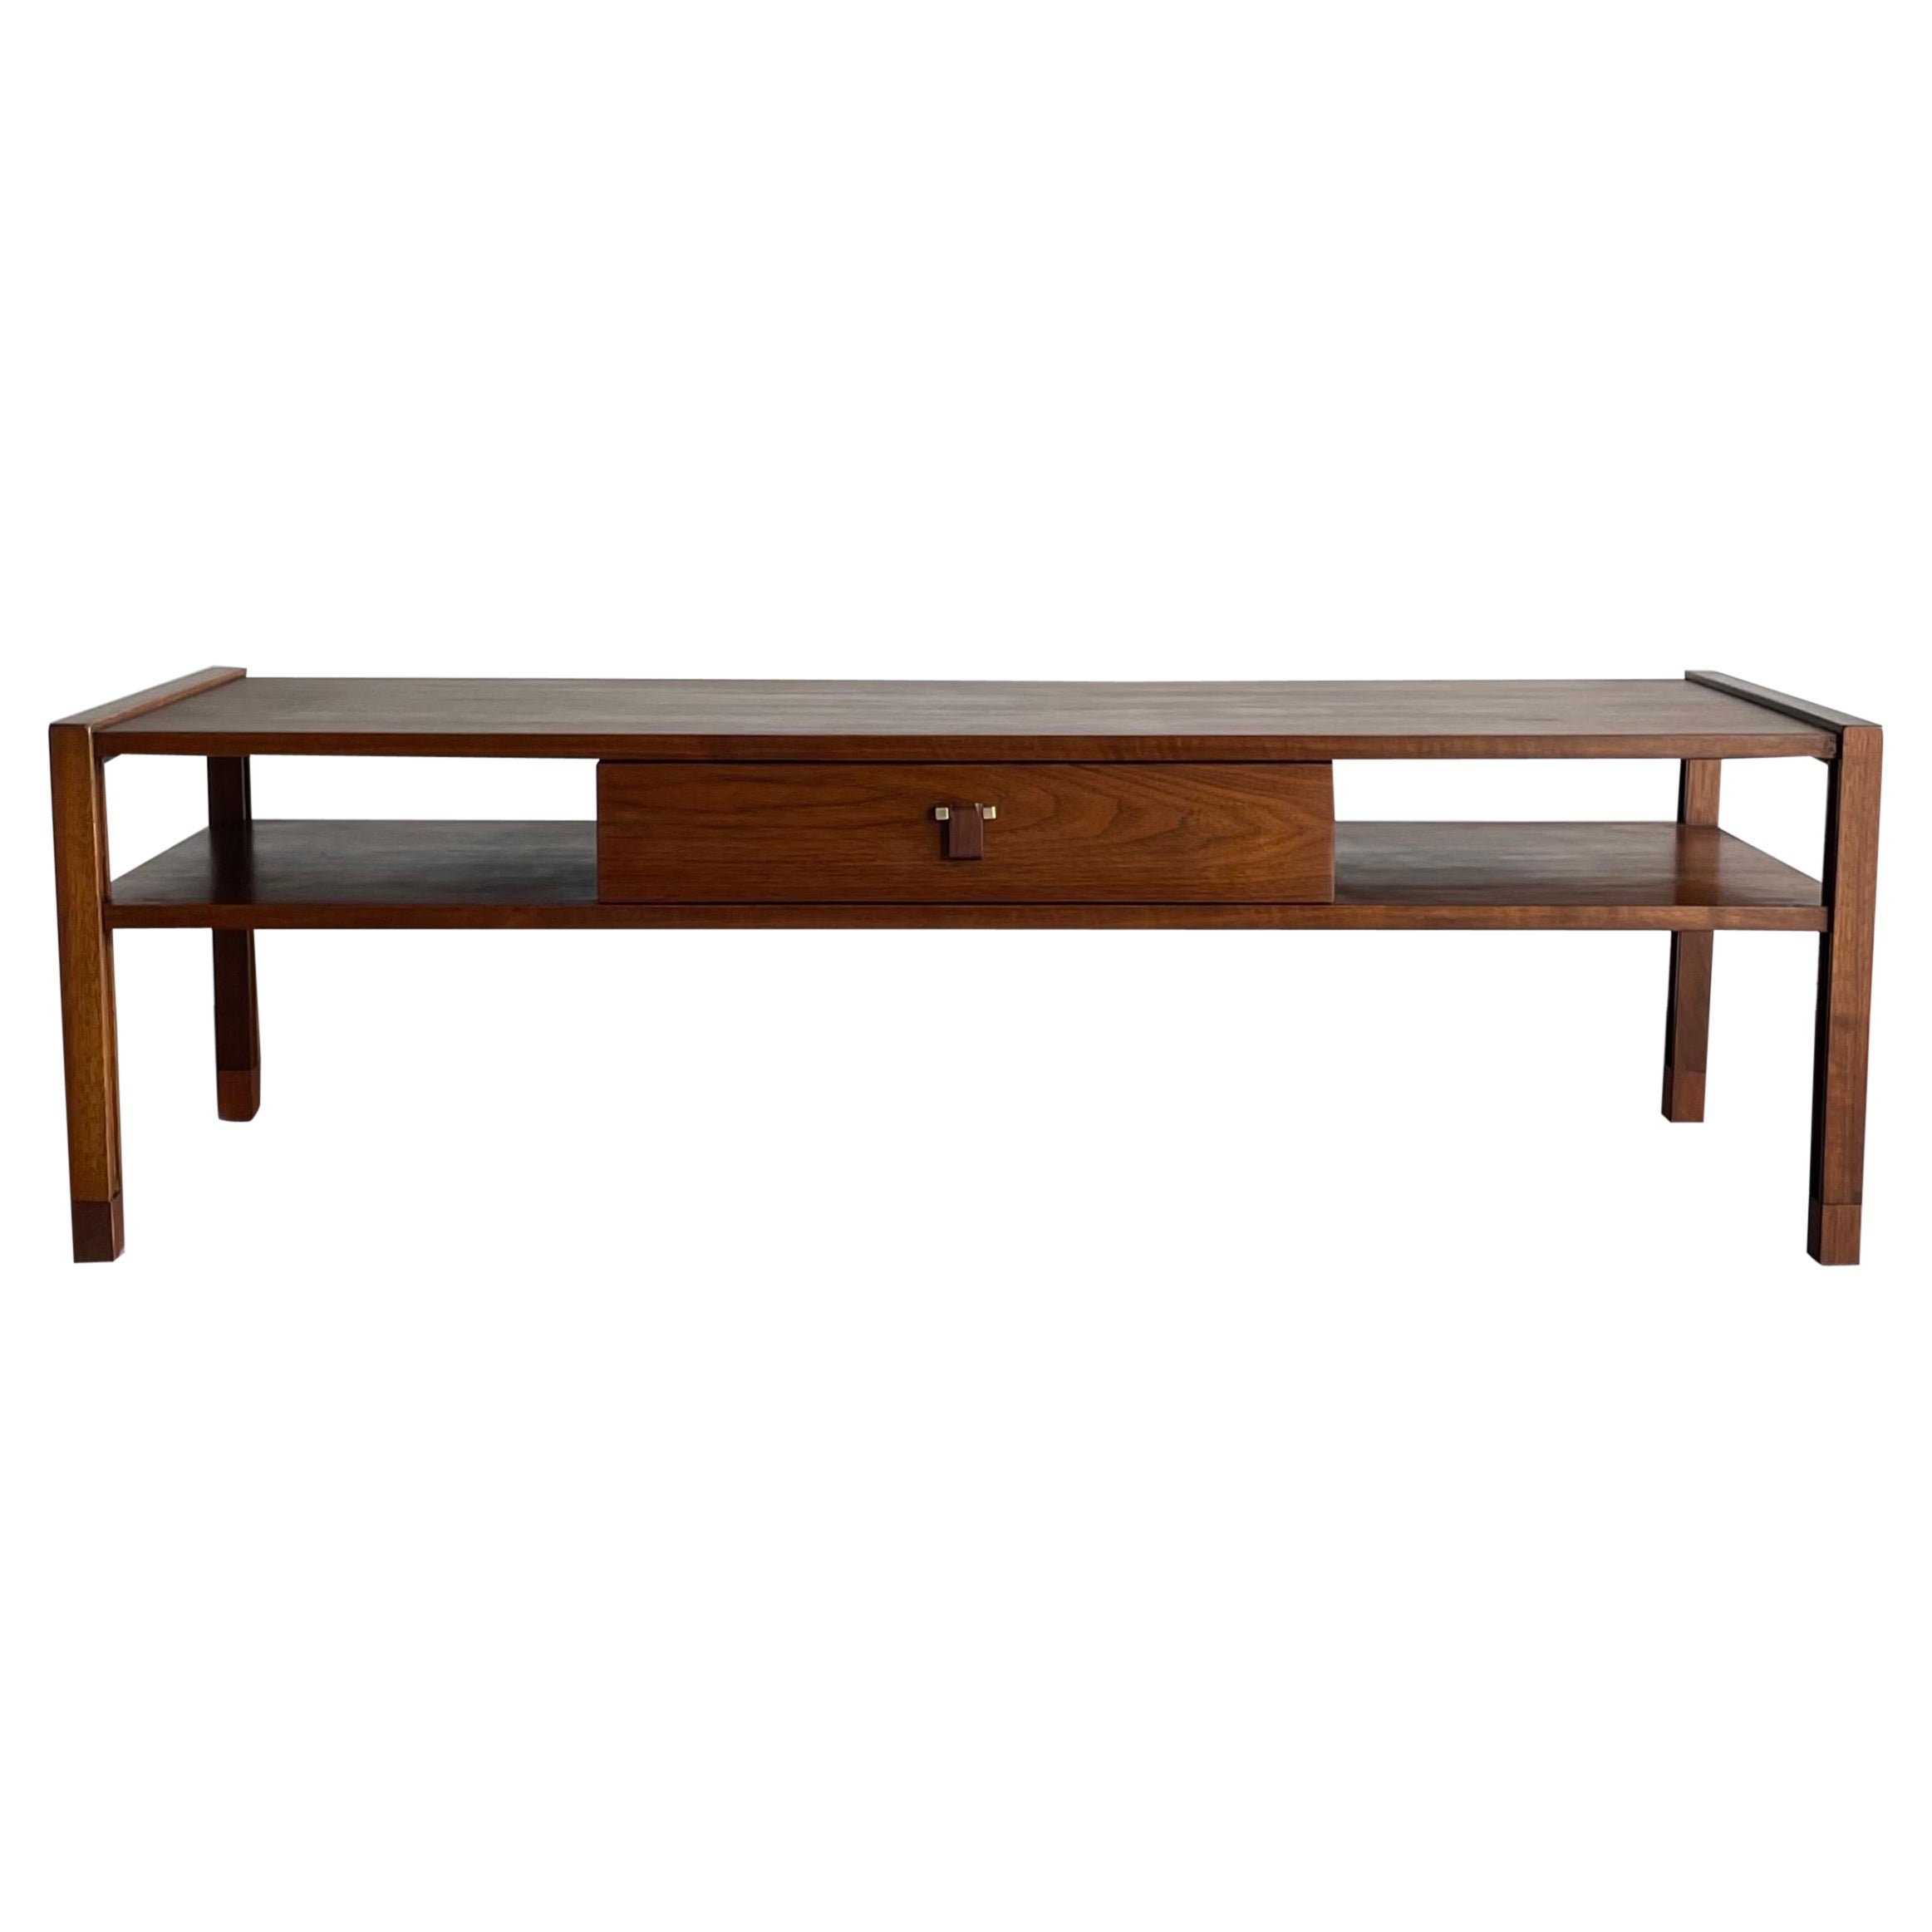 Edward Wormley for Dunbar Tiered Coffee Table, Walnut with Rosewood Drawer Pull